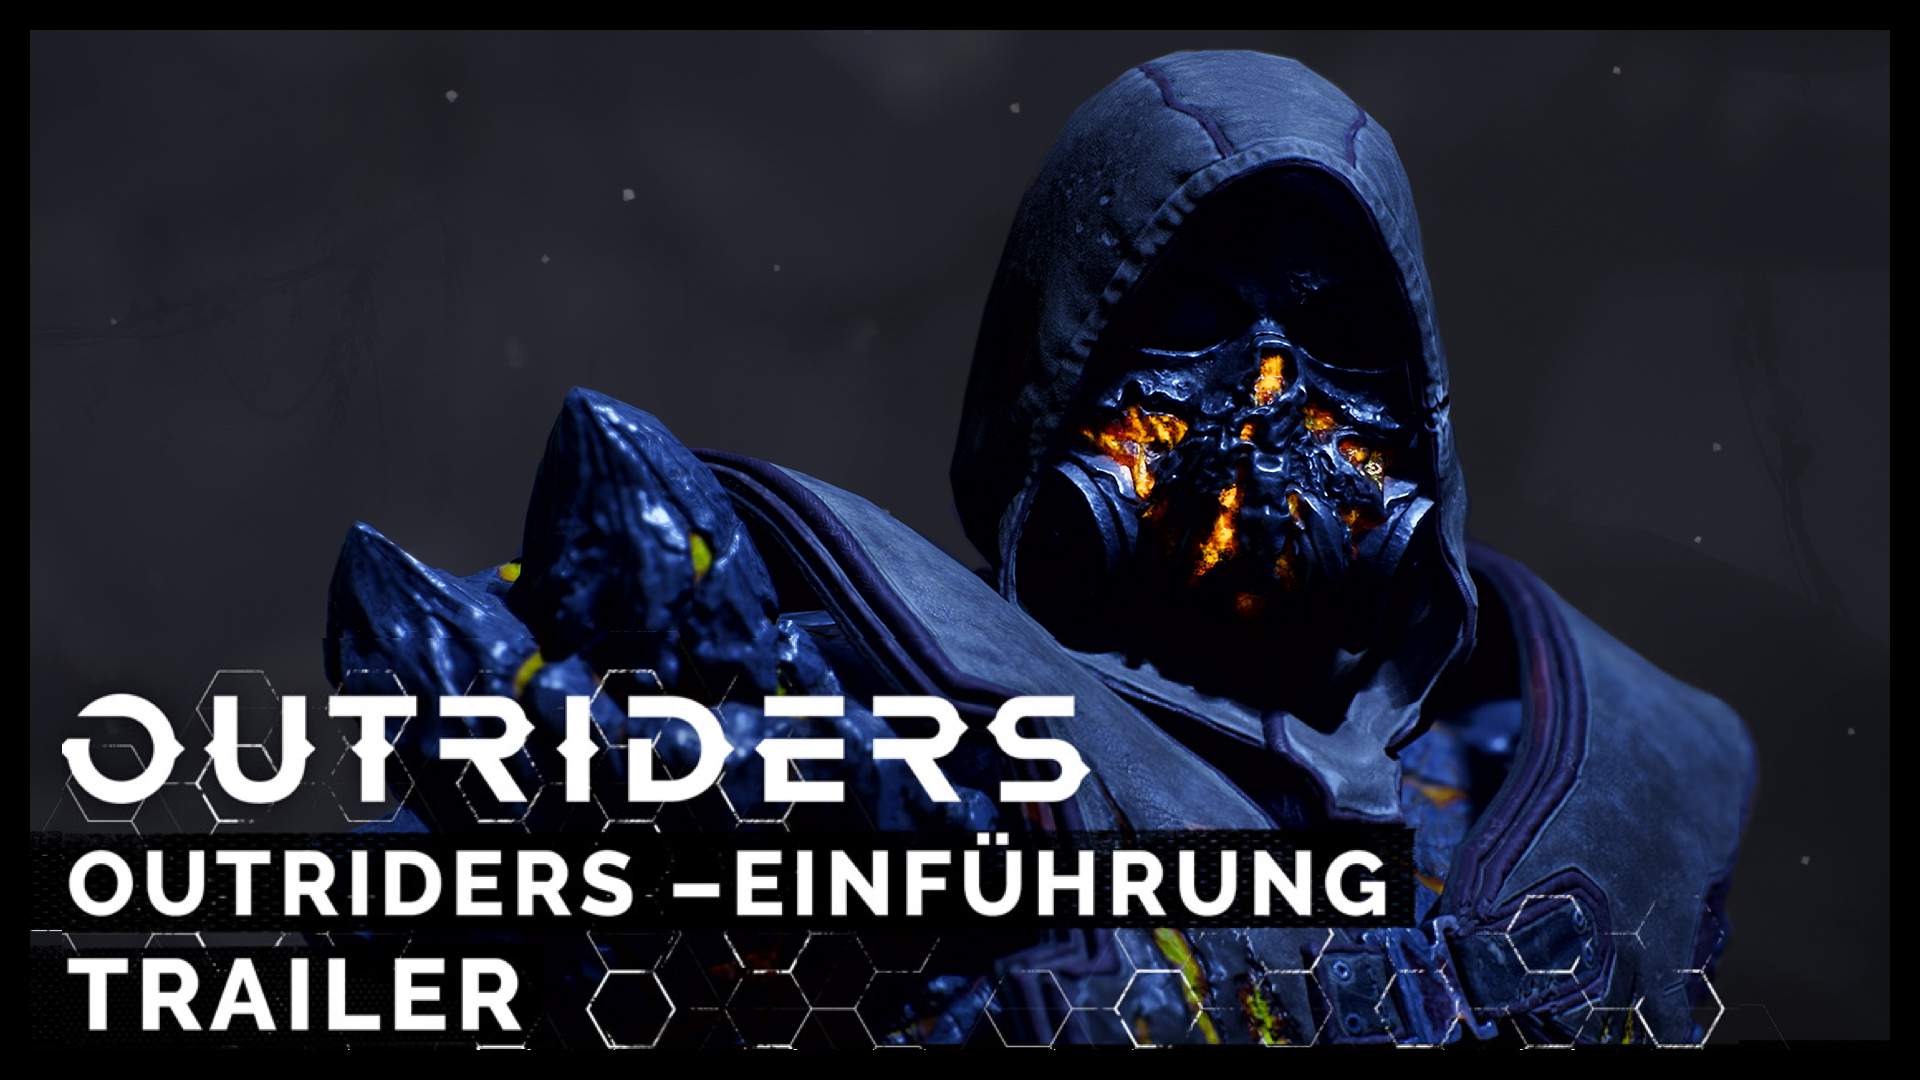 Das ist OUTRIDERS